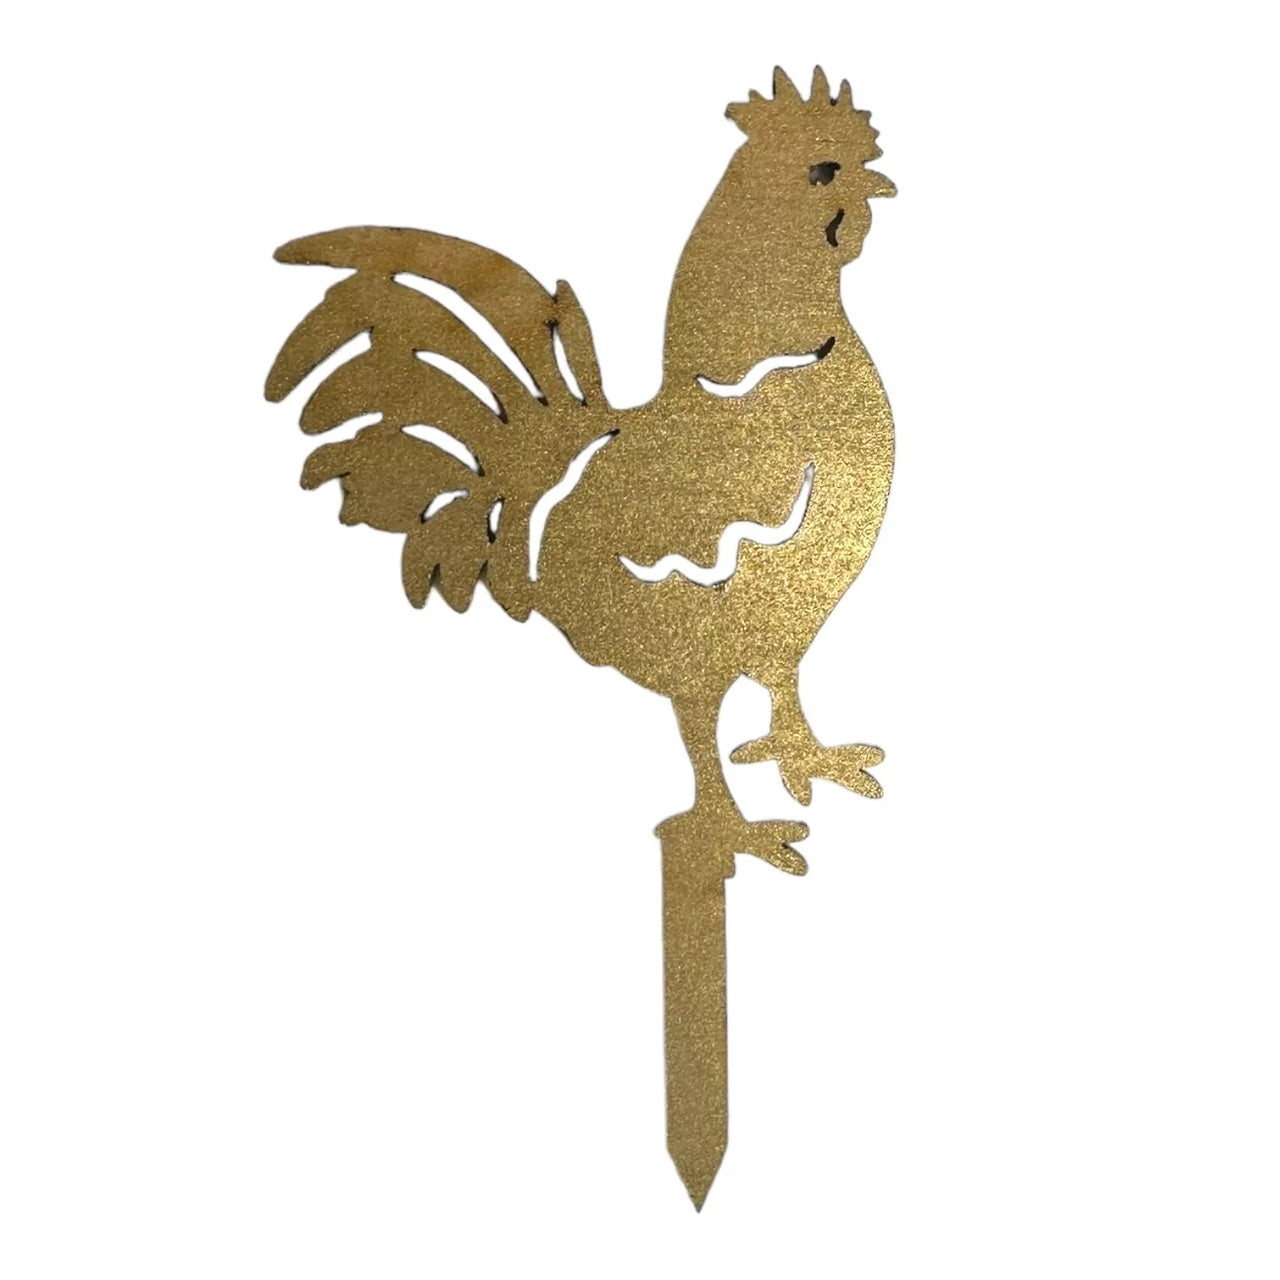 Handmade plant stakes with a difference -Gold Rooster